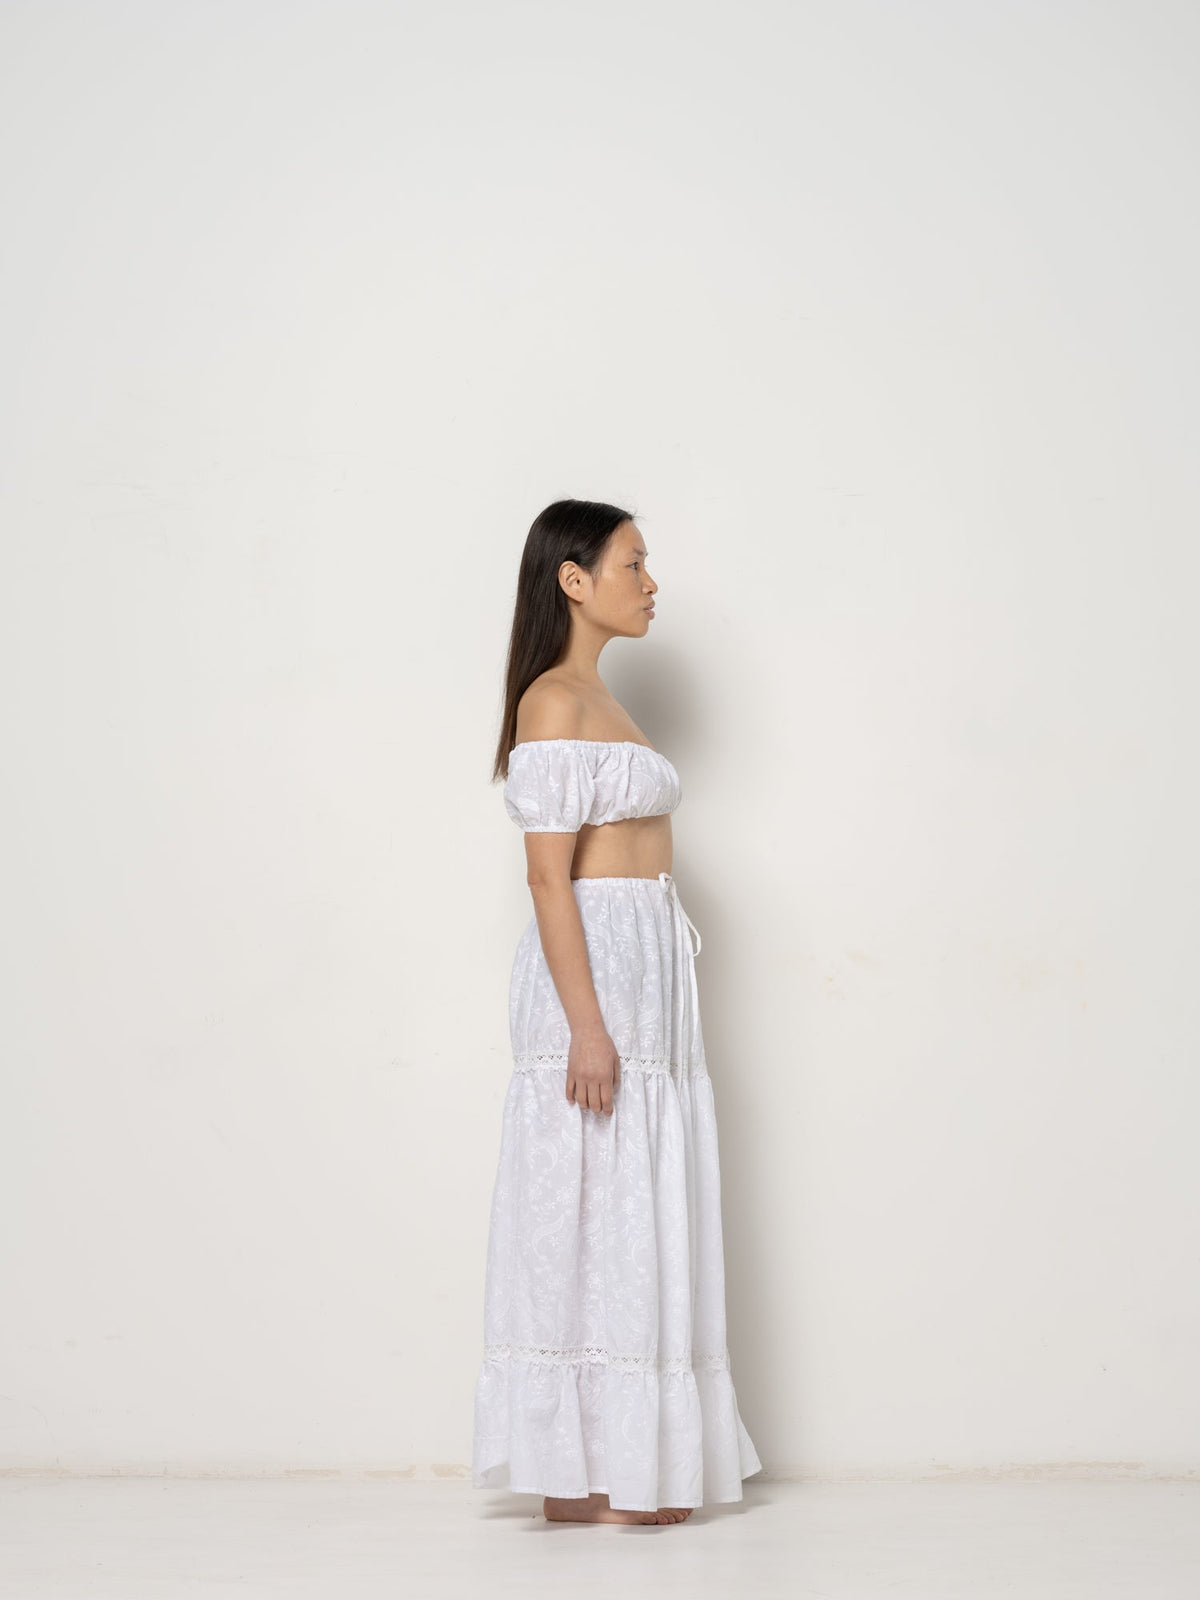 Rose Skirt - White Flowers Embroidery Cotton